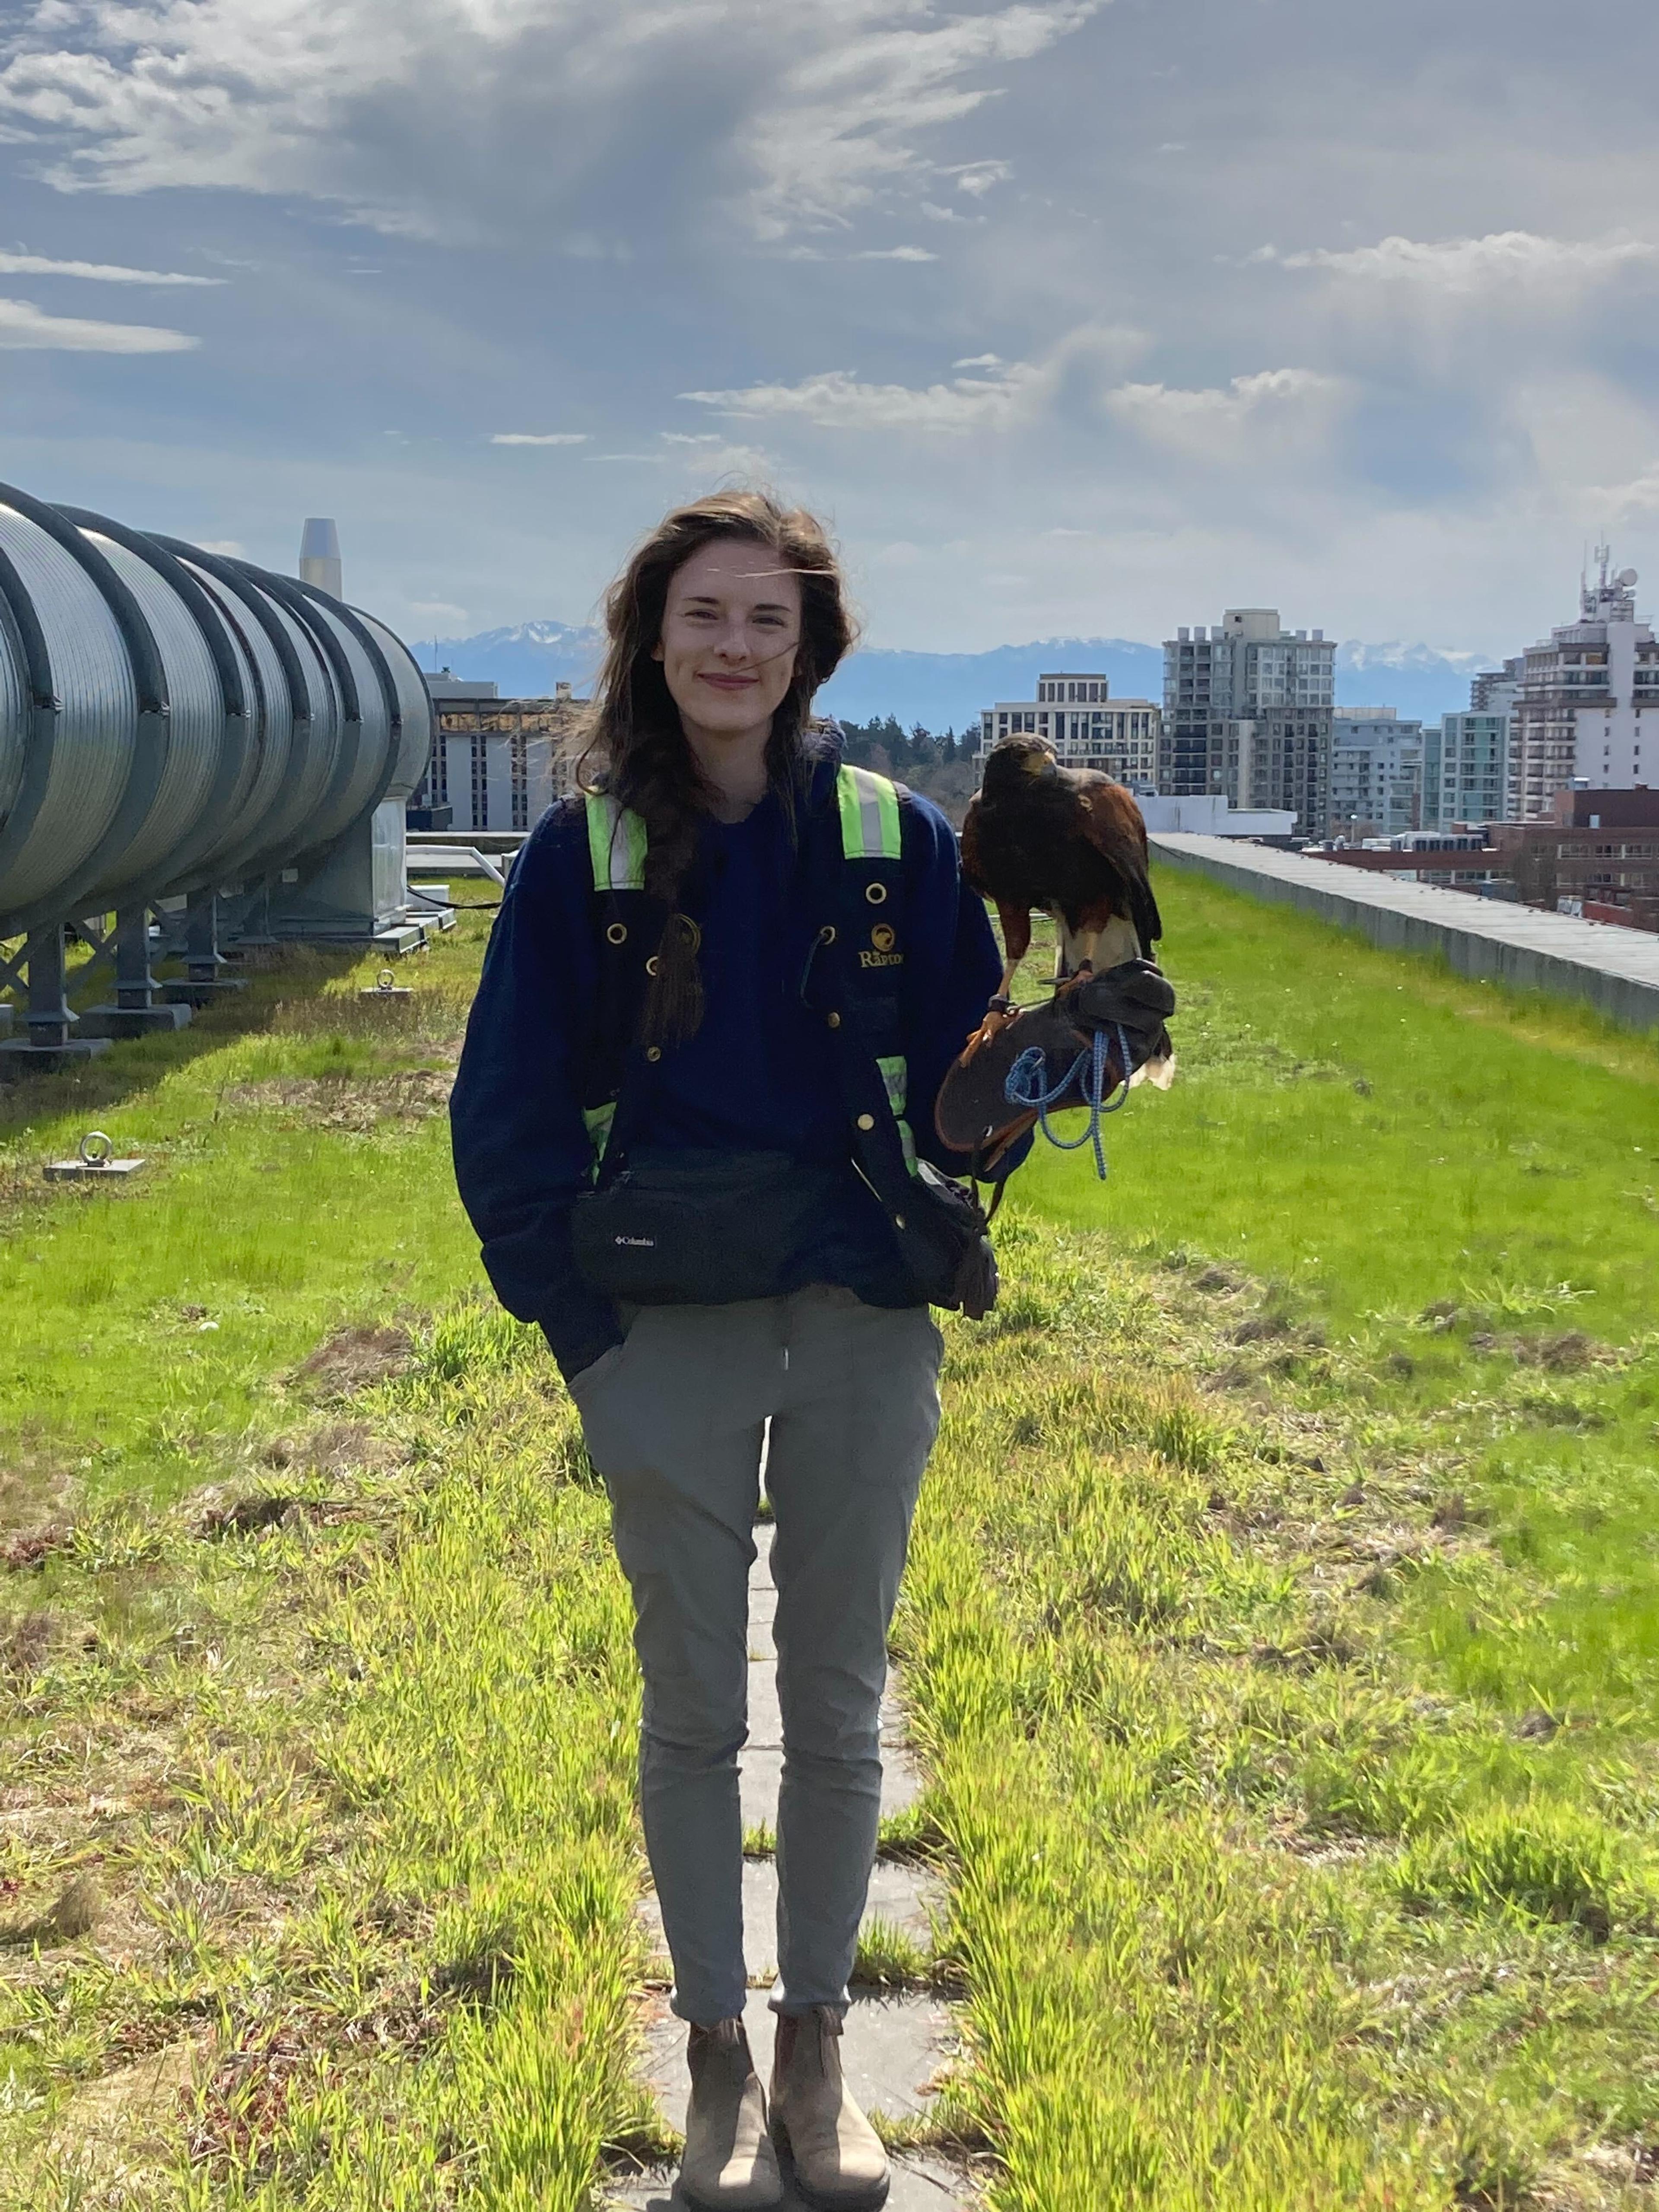 Raptors employee standing on a rooftop with a hawk on her glove